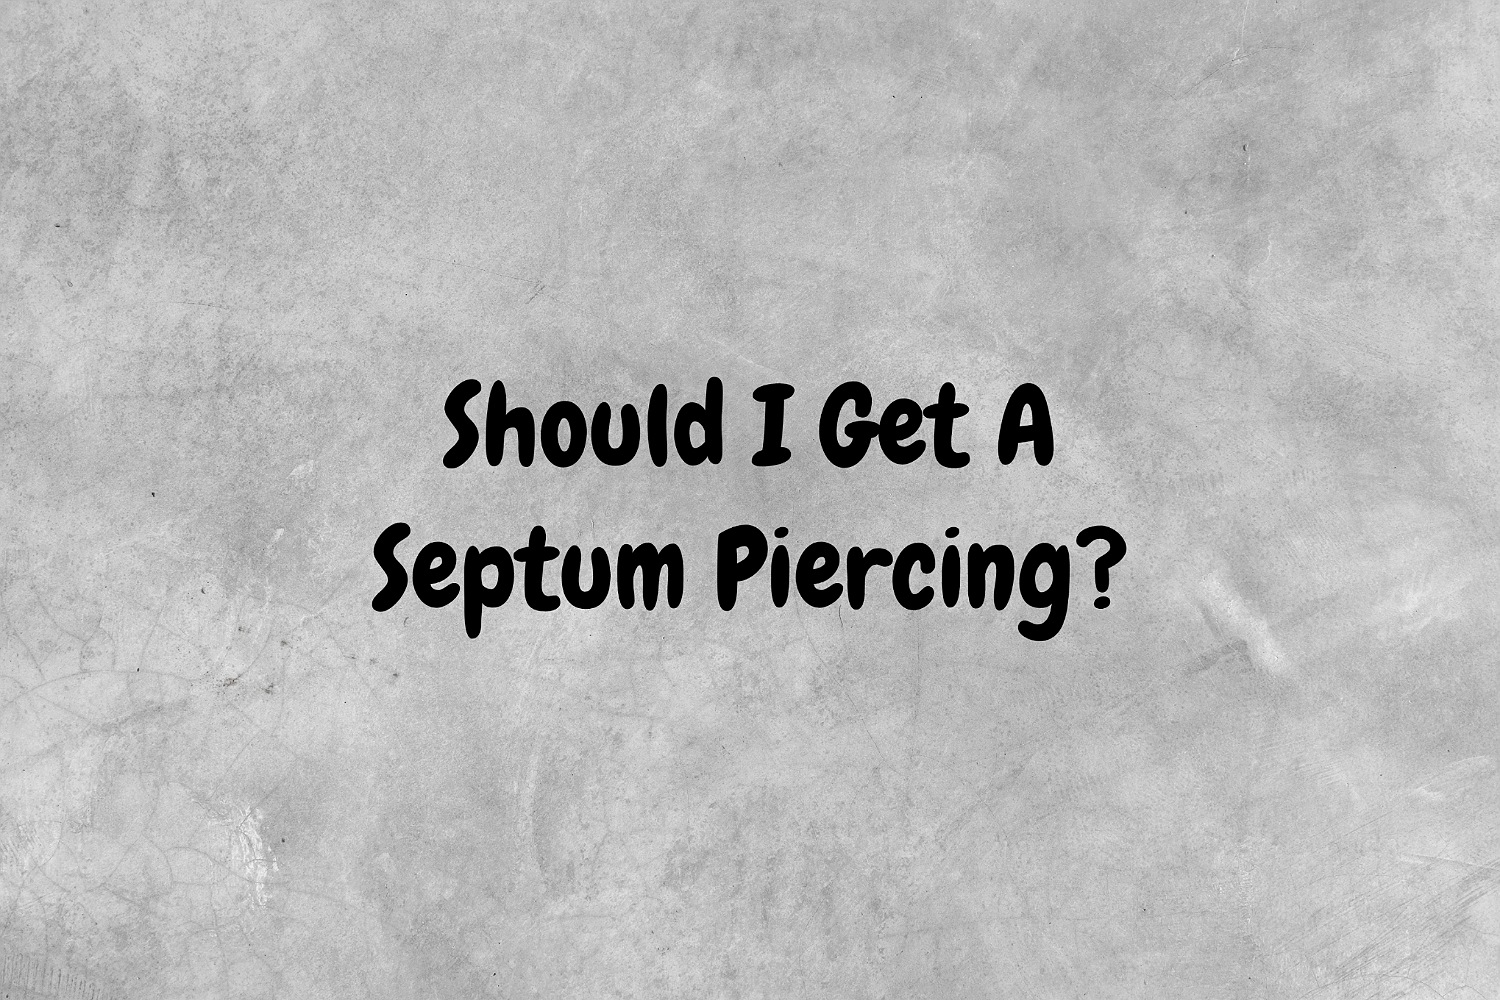 An image with a gray background with black text proposing the question, "Should I get a septum piercing?"